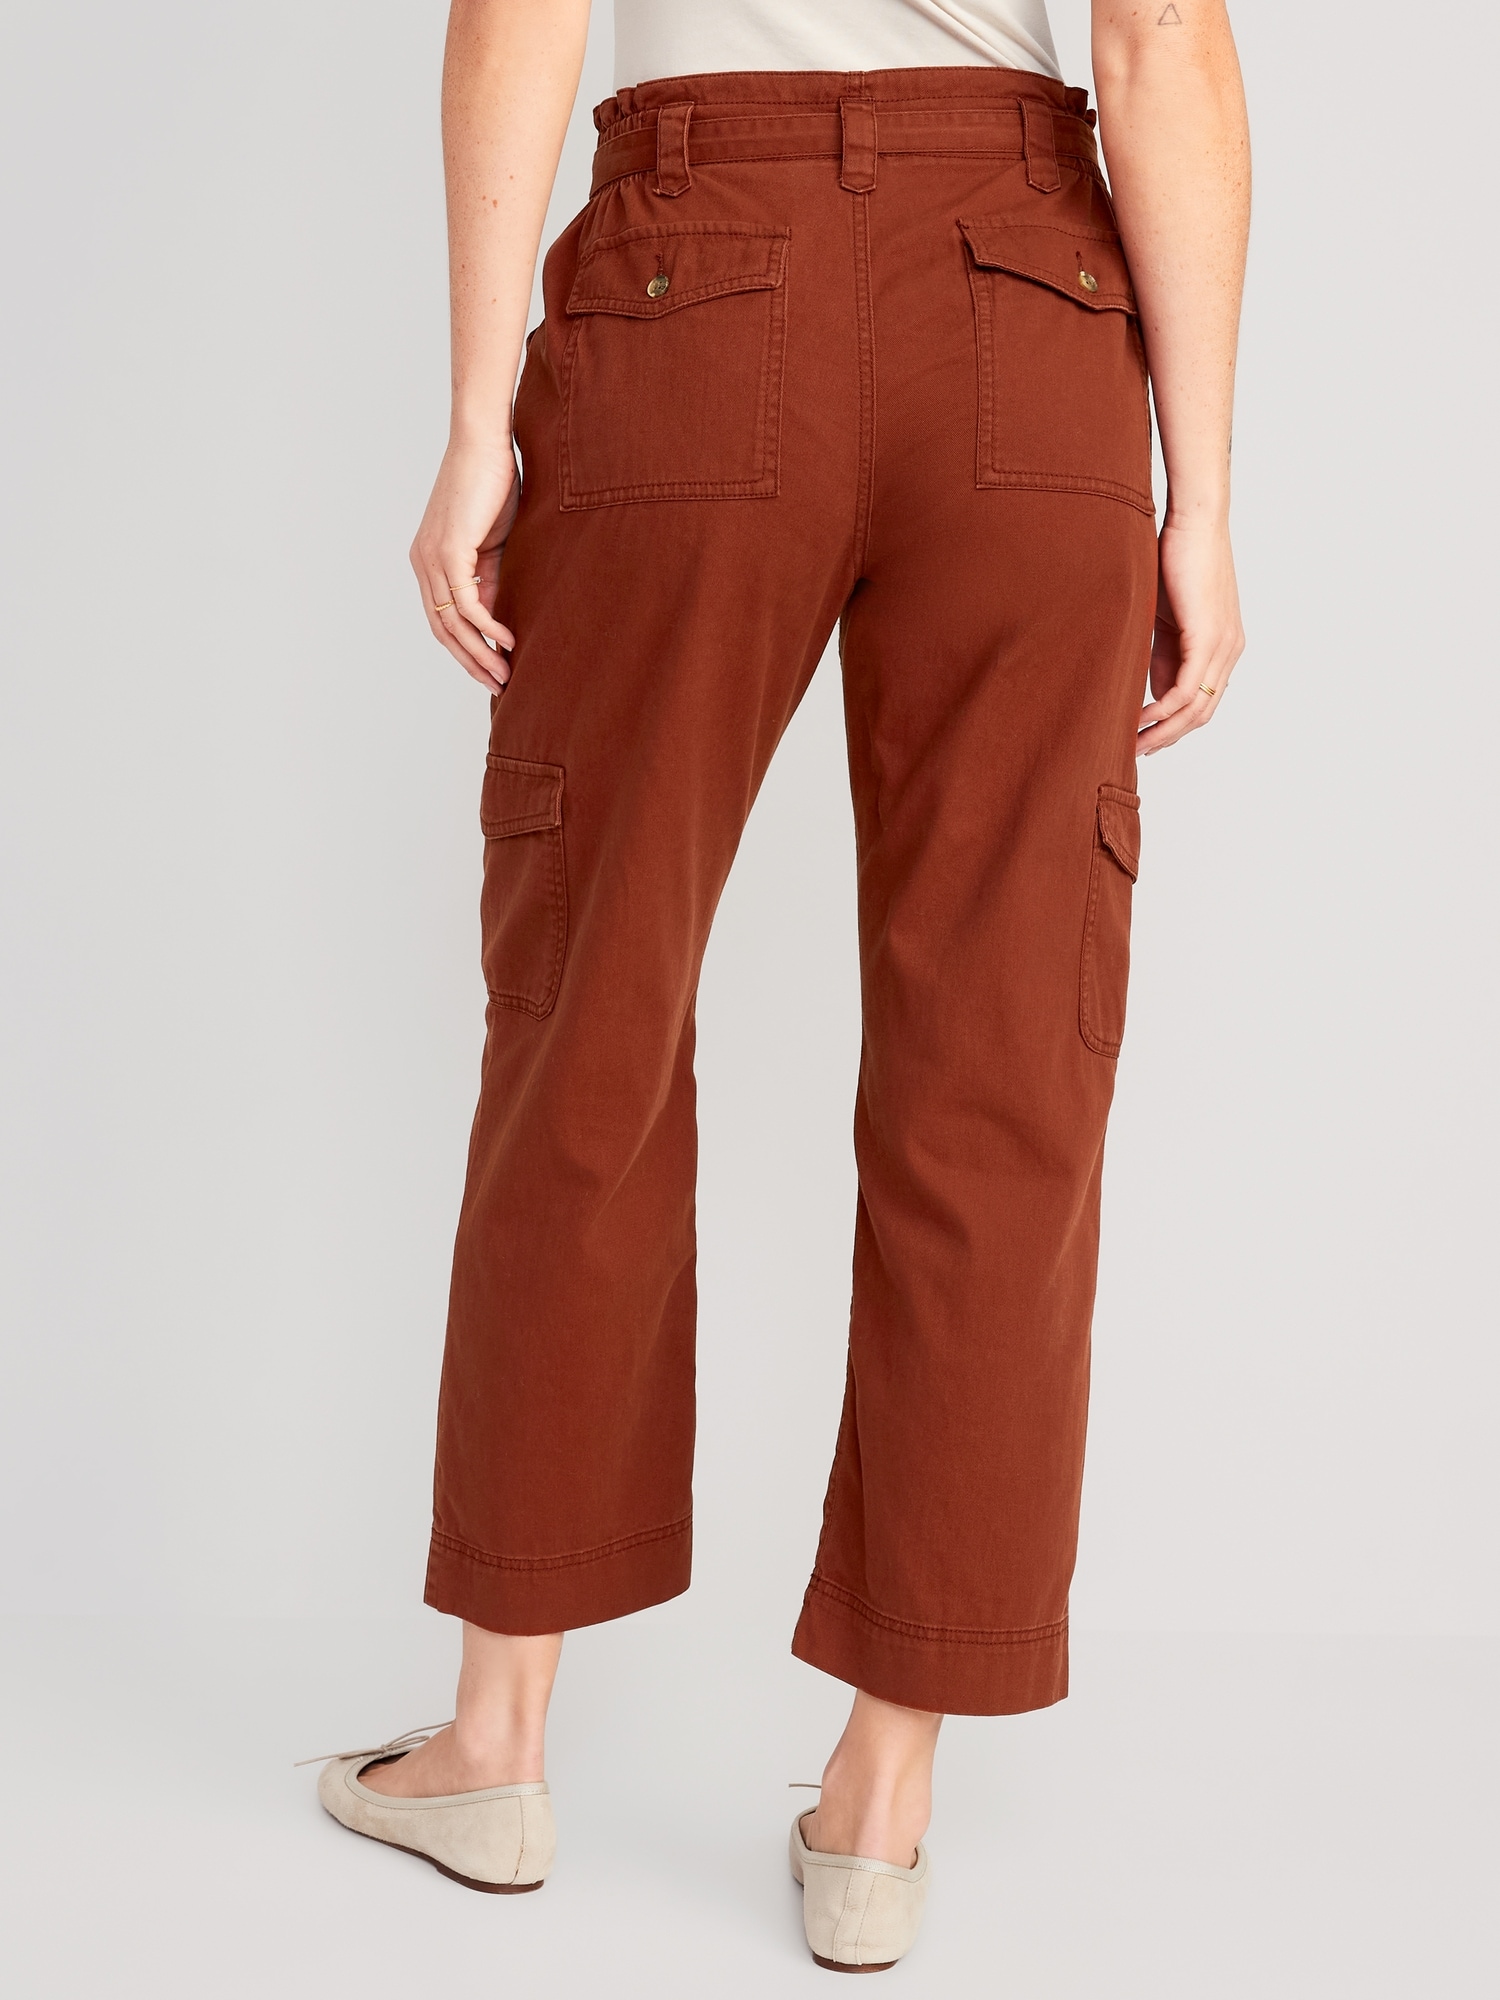 Stretch Twill Slim-Fit Cargo Pants for Tall Men in Russet Brown 30 / 36 / Russet Brown